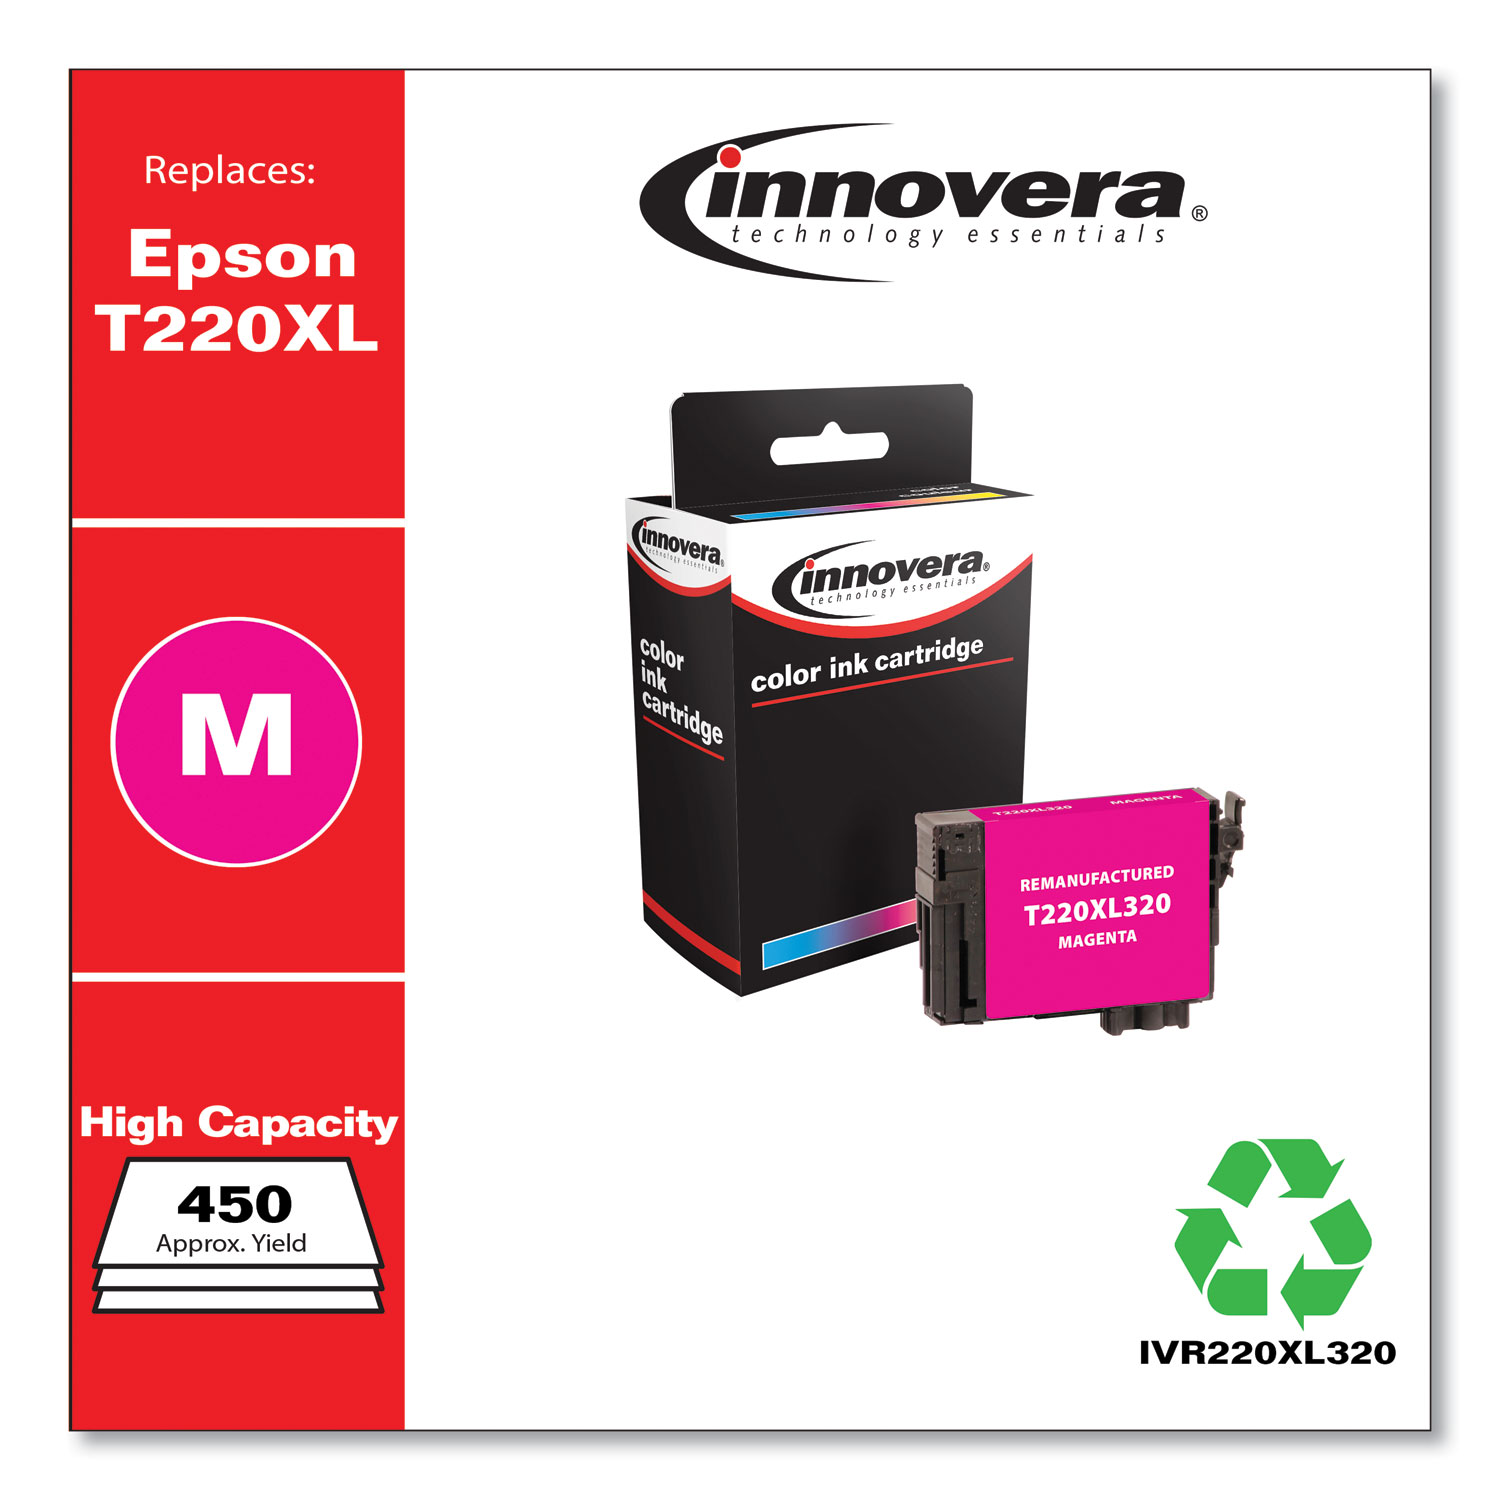  Innovera IVR220XL320 Remanufactured Magenta High-Yield Ink, Replacement for Epson T220XL (T220XL320), 450 Page-Yield (IVR220XL320) 